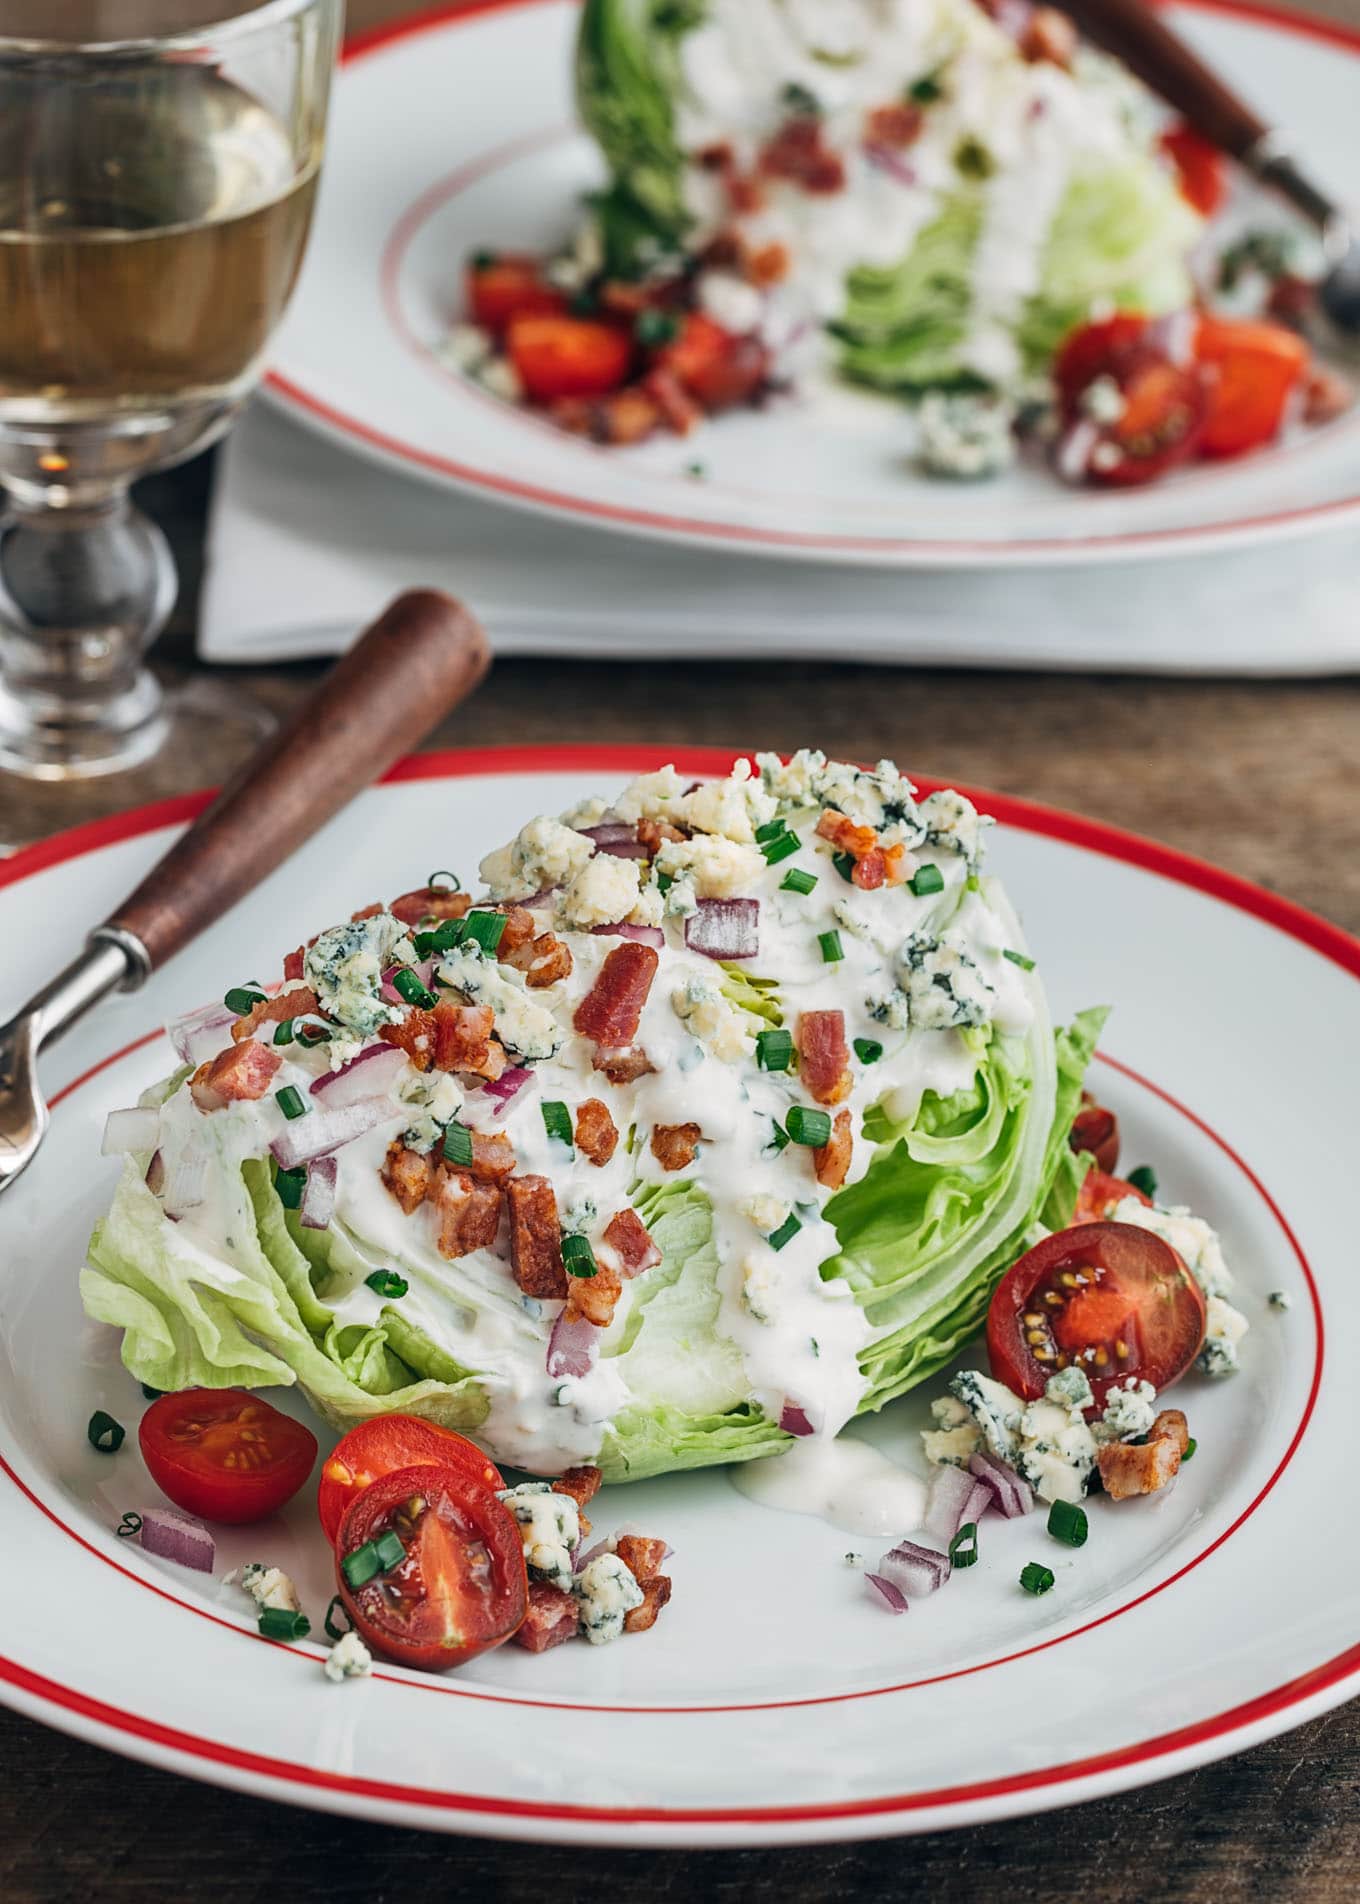 classic wedge salad with iceberg lettuce, bacon, and blue cheese dressing on a plate